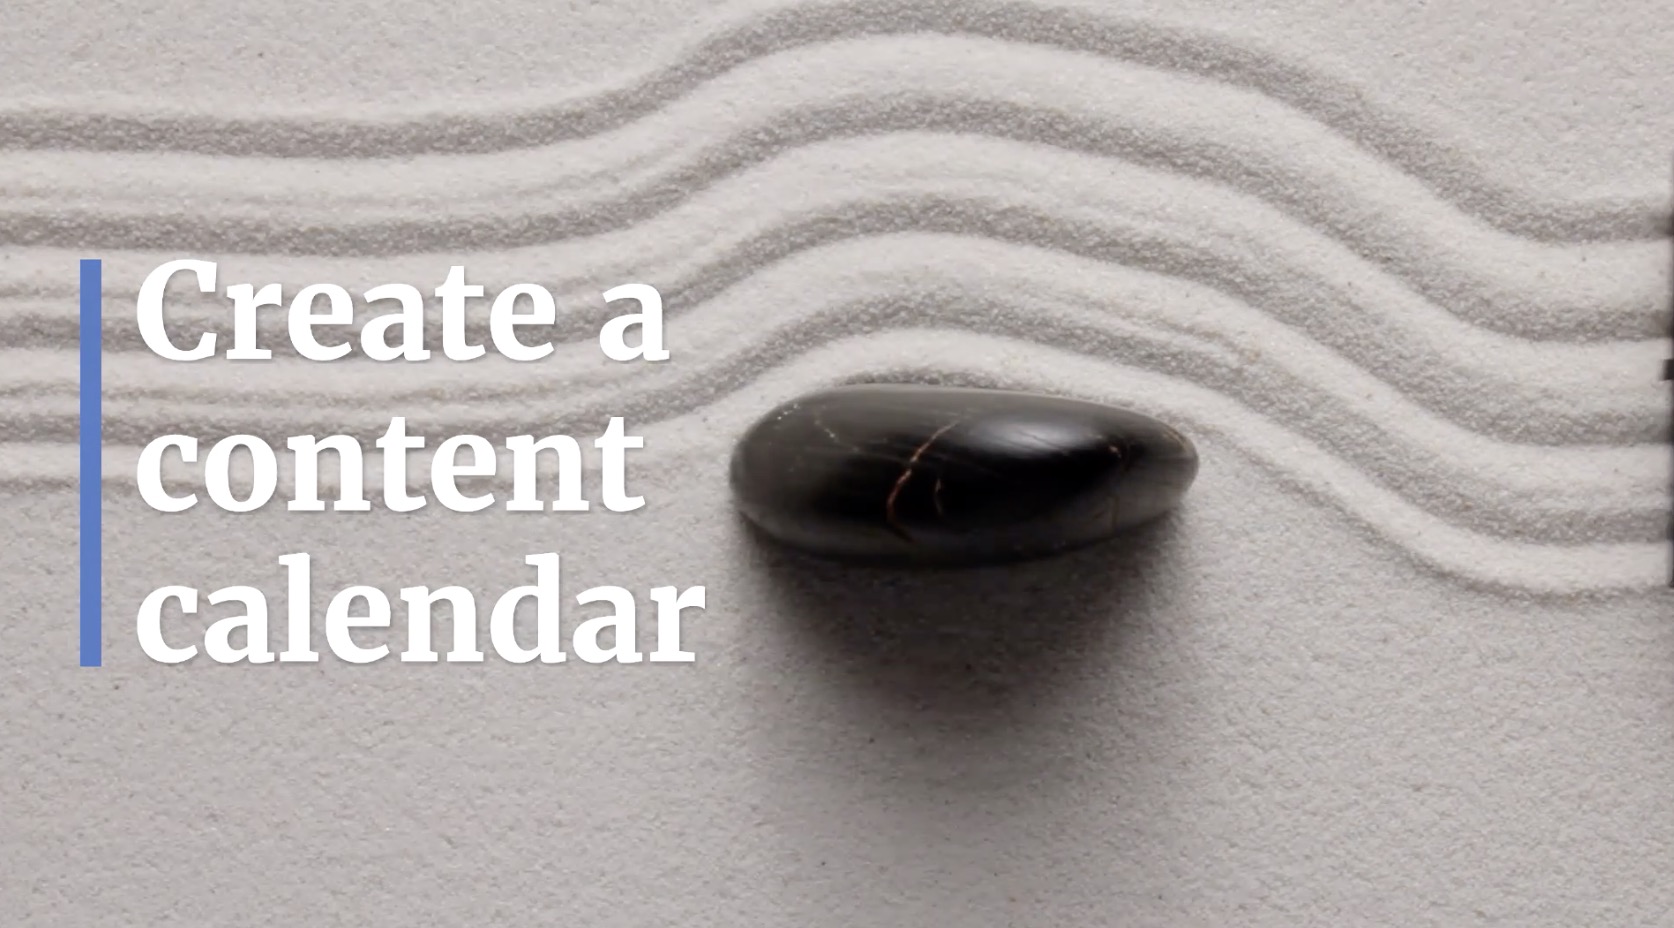 create a content calendar when planning content marketing strategy